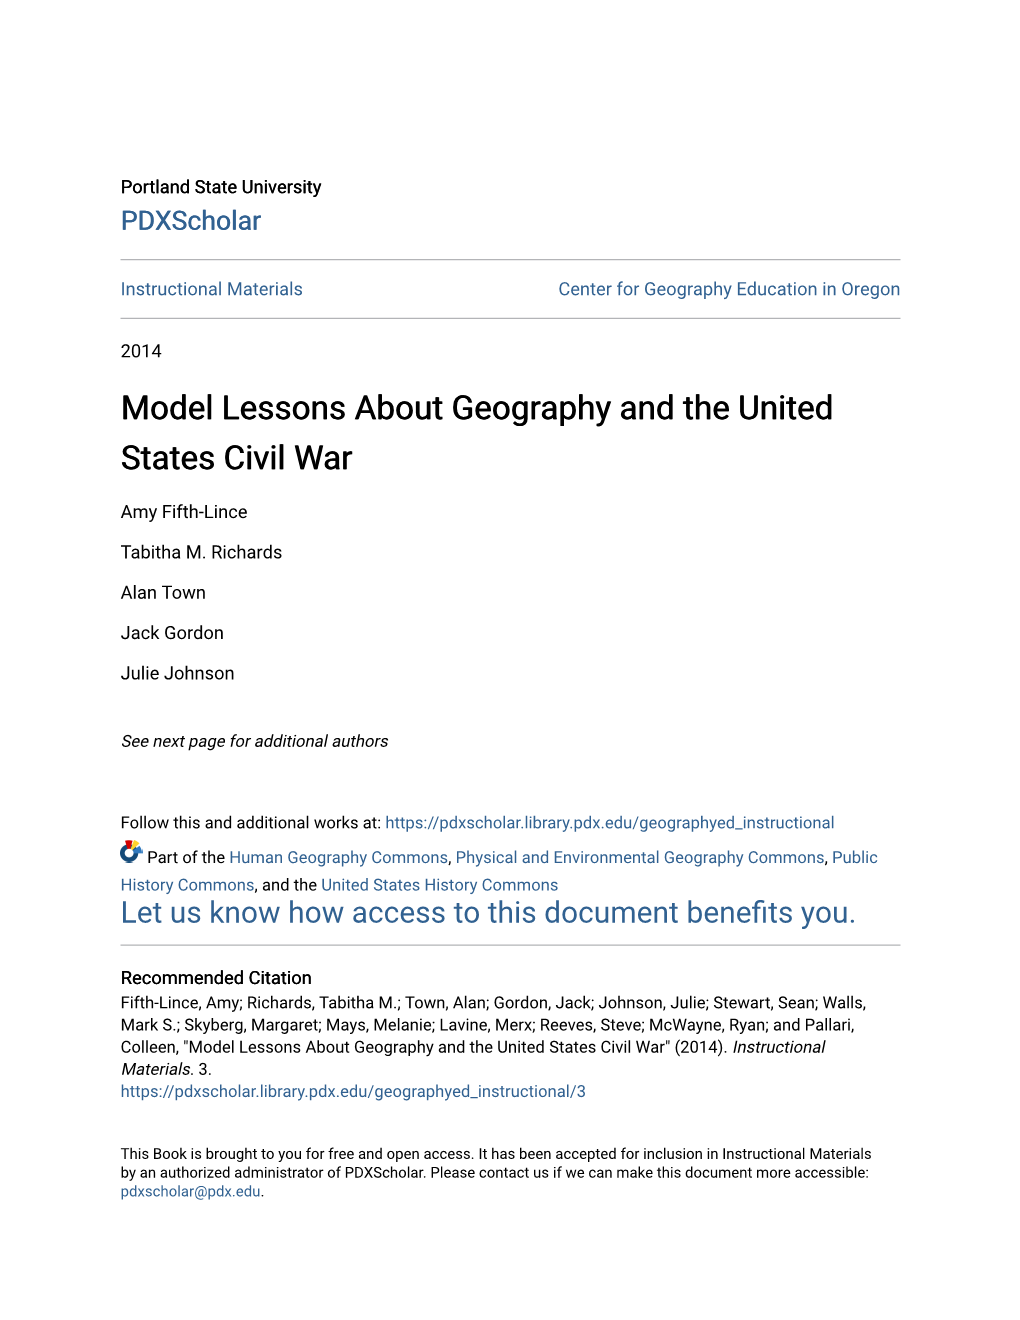 Model Lessons About Geography and the United States Civil War